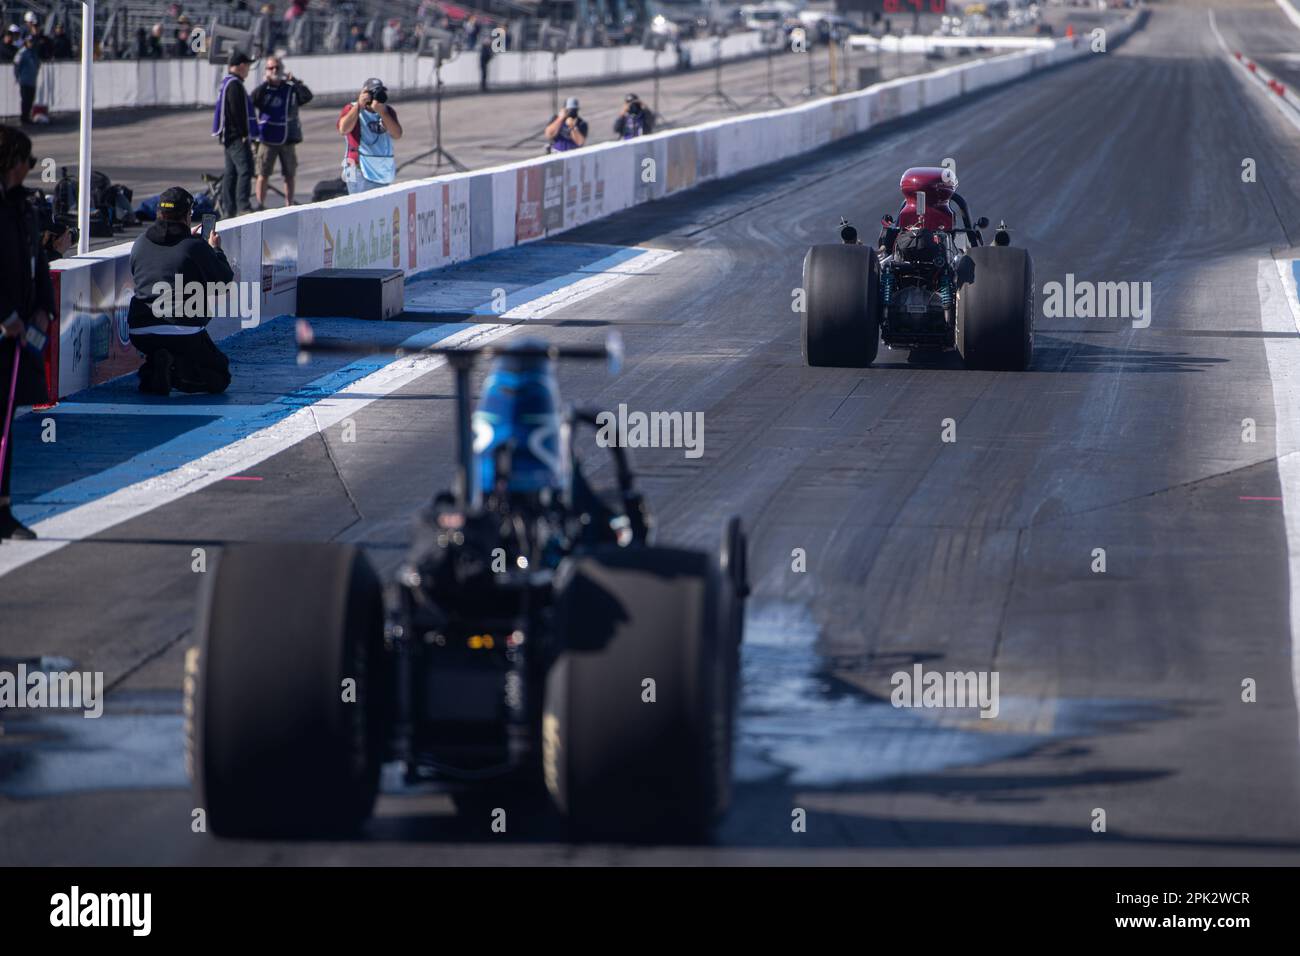 Pomona, United States. 31st Mar, 2023. Drivers from the Lucas Oil Wintrernational stage do practice runs before the days competition. Professional Drag racers nationwide rally together to compete at the Lucas Oil NHRA Winternationals held at the In-N-Out Burger Pomona Dragstrip for the 63rd consecutive year. Drivers battled over a three-day period starting on March 31st and concluding on April 2, fighting to take the titles in each of their divisions. Credit: SOPA Images Limited/Alamy Live News Stock Photo